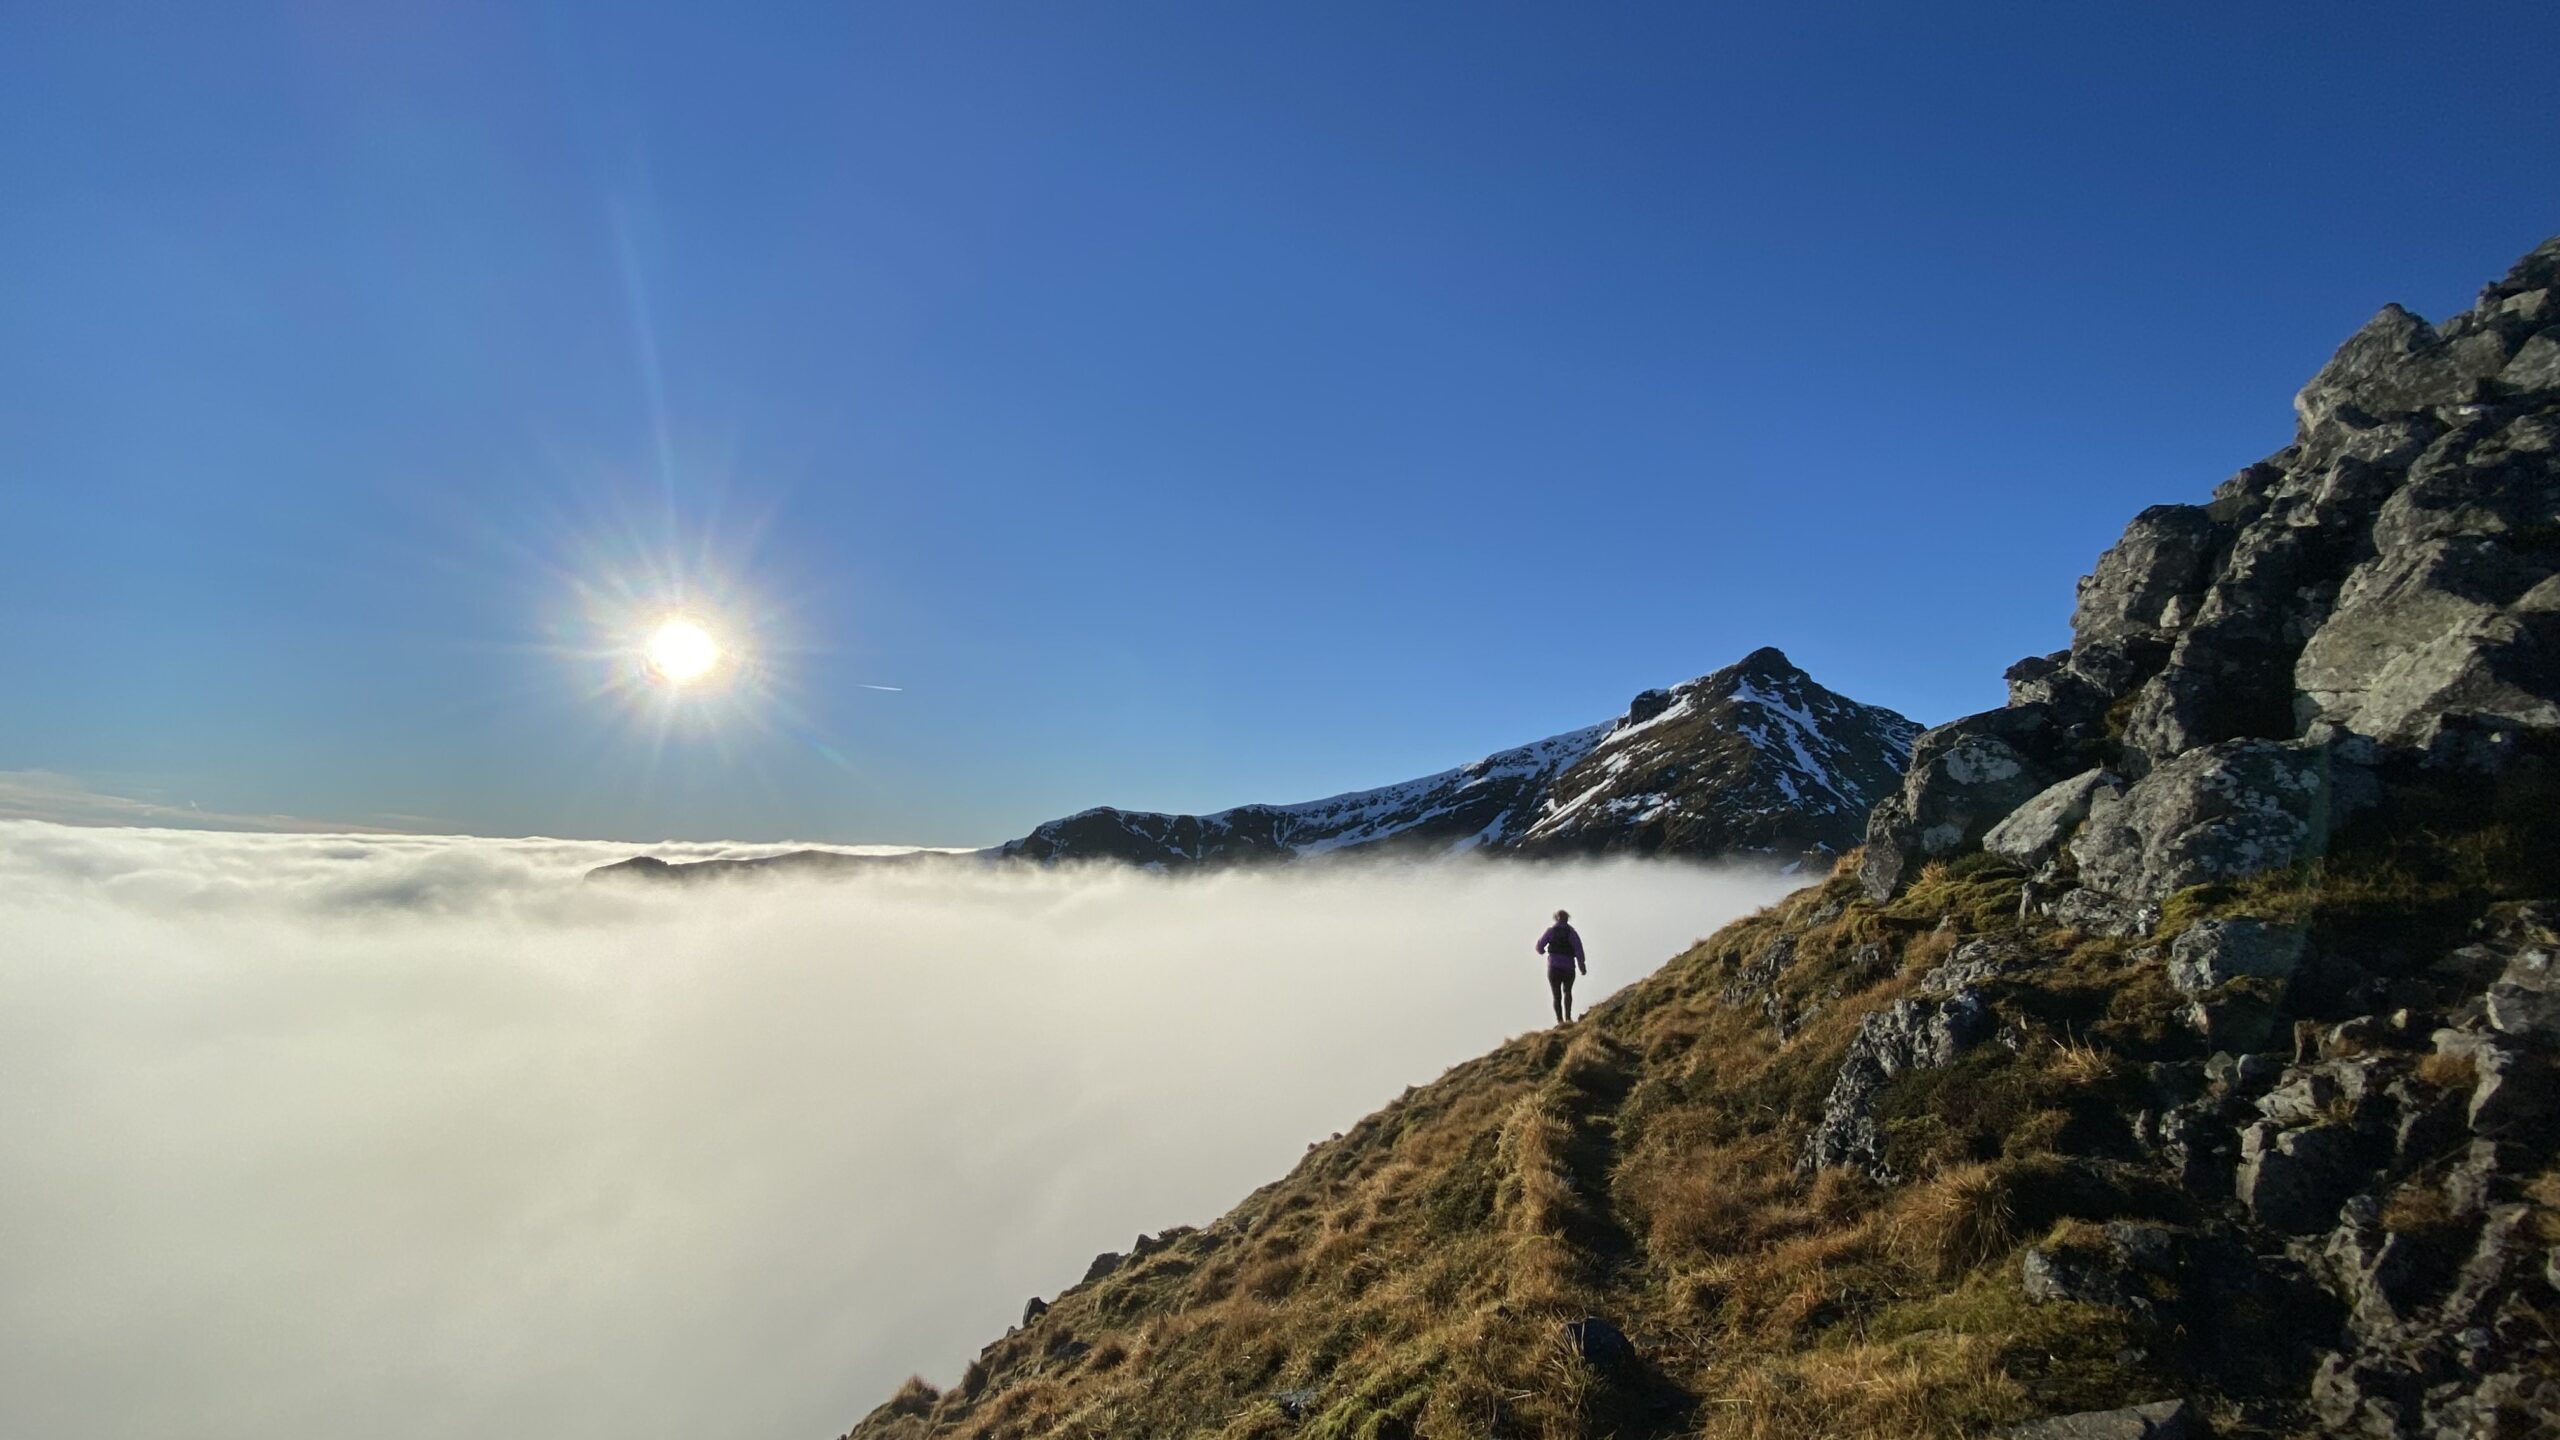 a solo runner above the clouds on a rocky mountain trail, sun shining